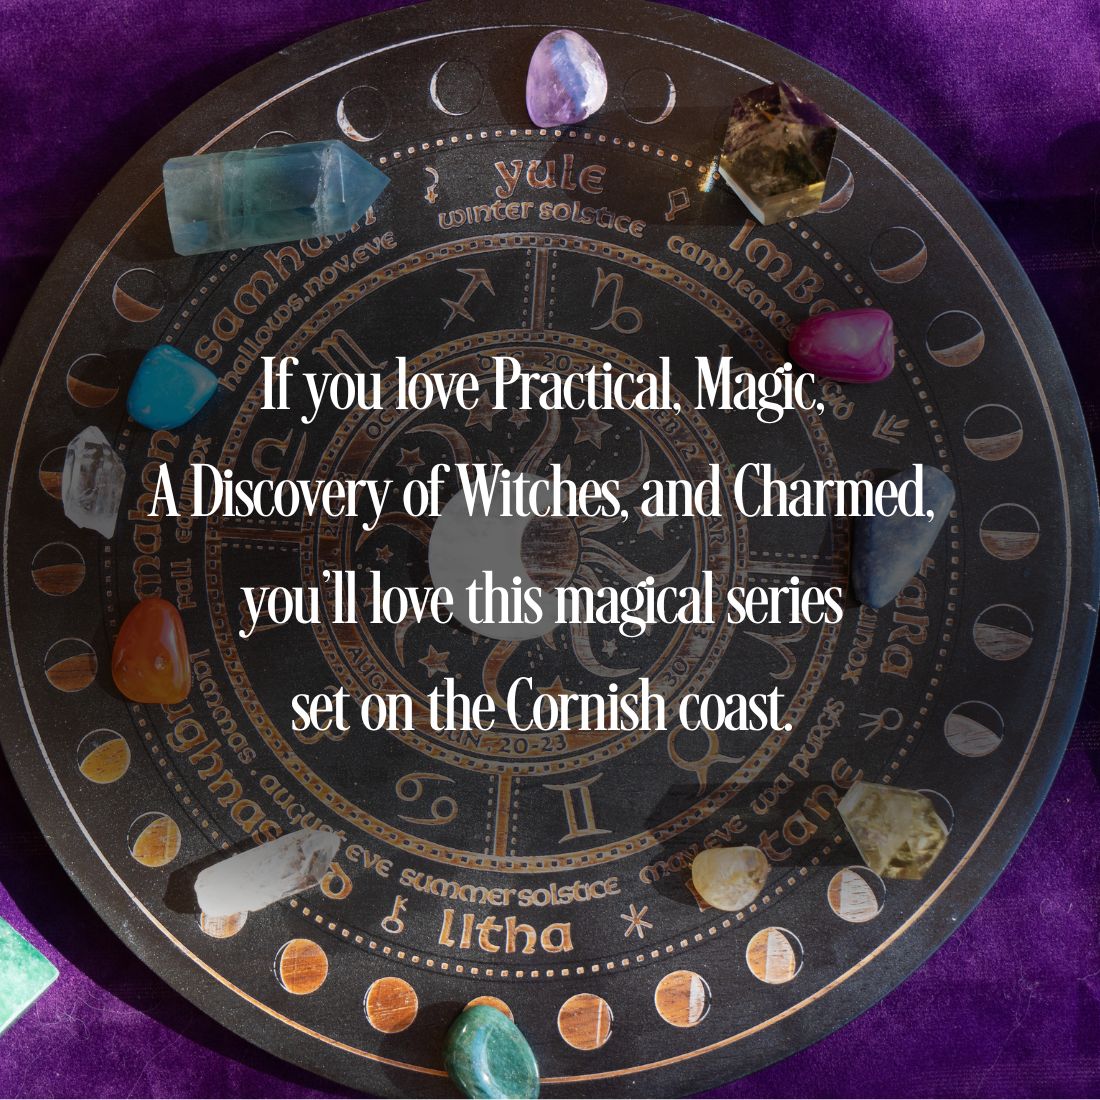 Chaos Magic, rogue witches, witchcraft, crystals, paranormal mysteries